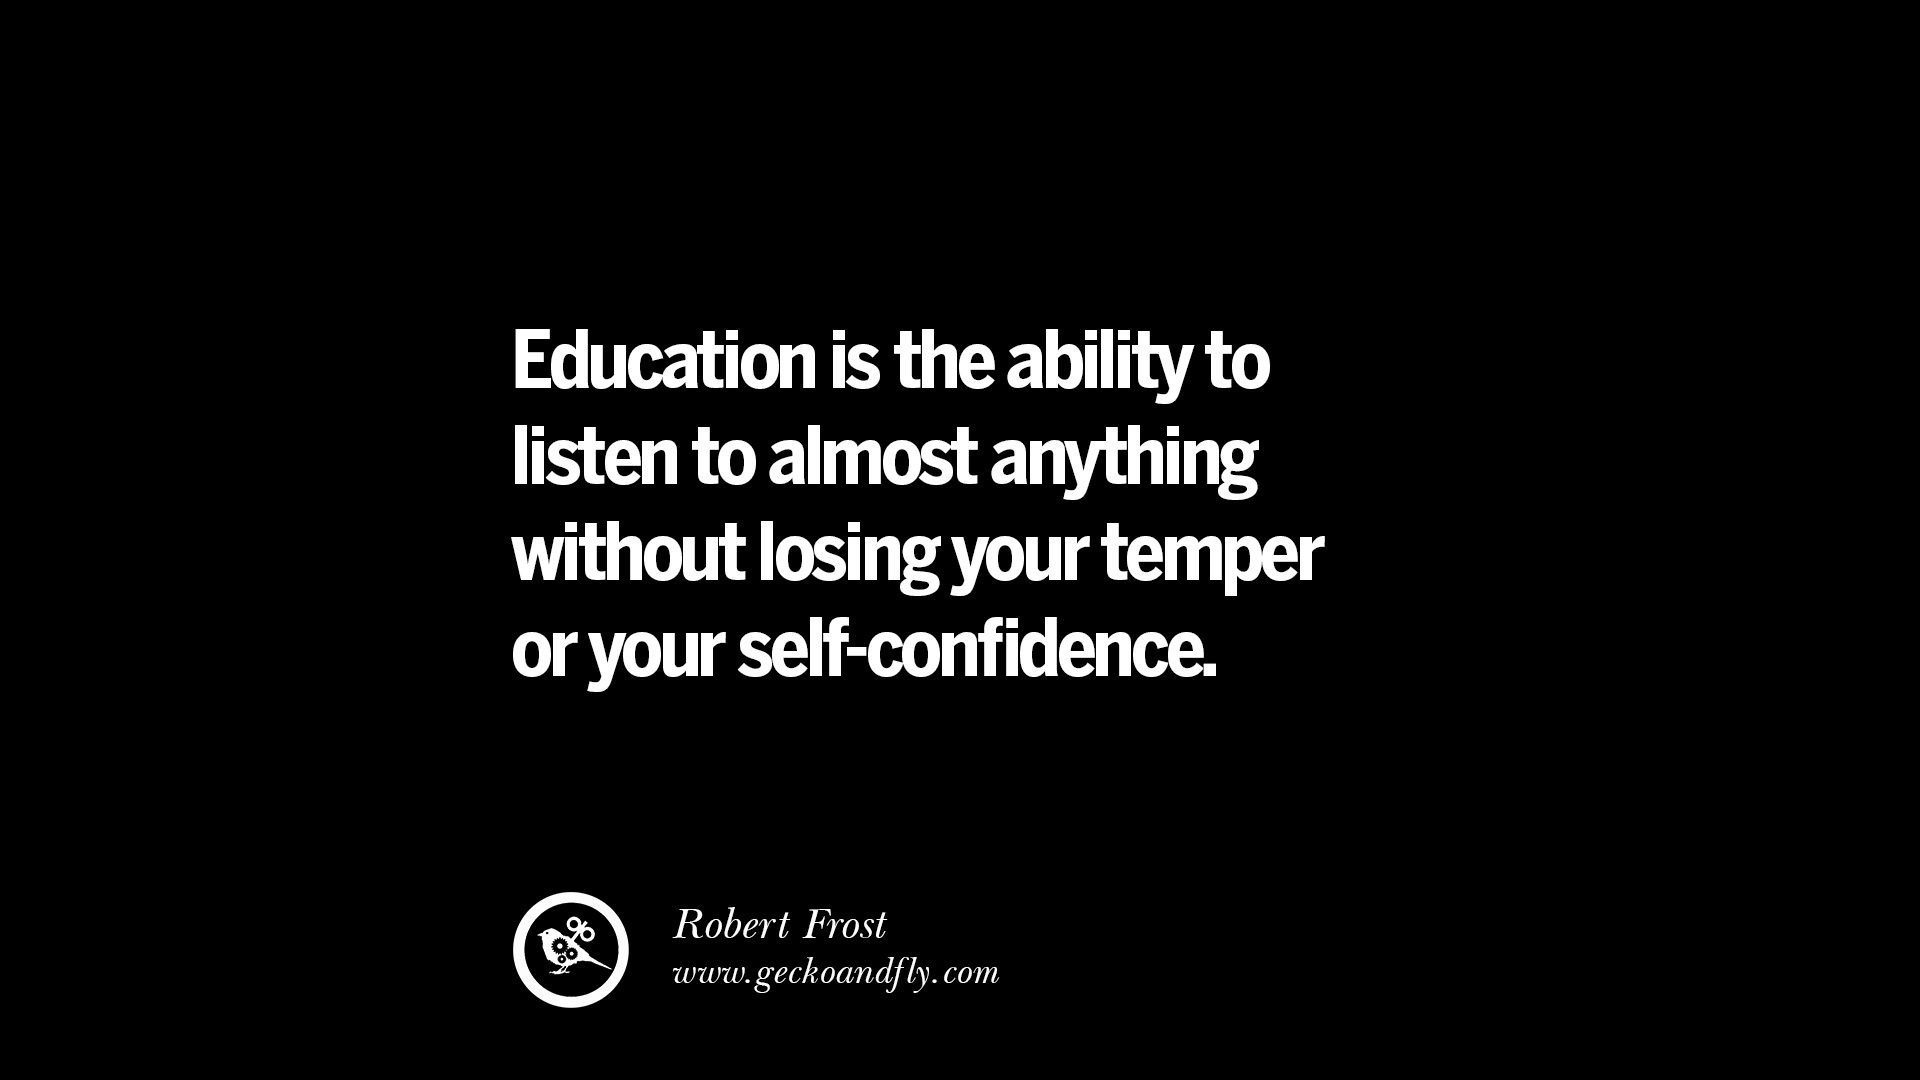 Quotes For Education
 57 Famous Quotes Education Teaching Schooling And